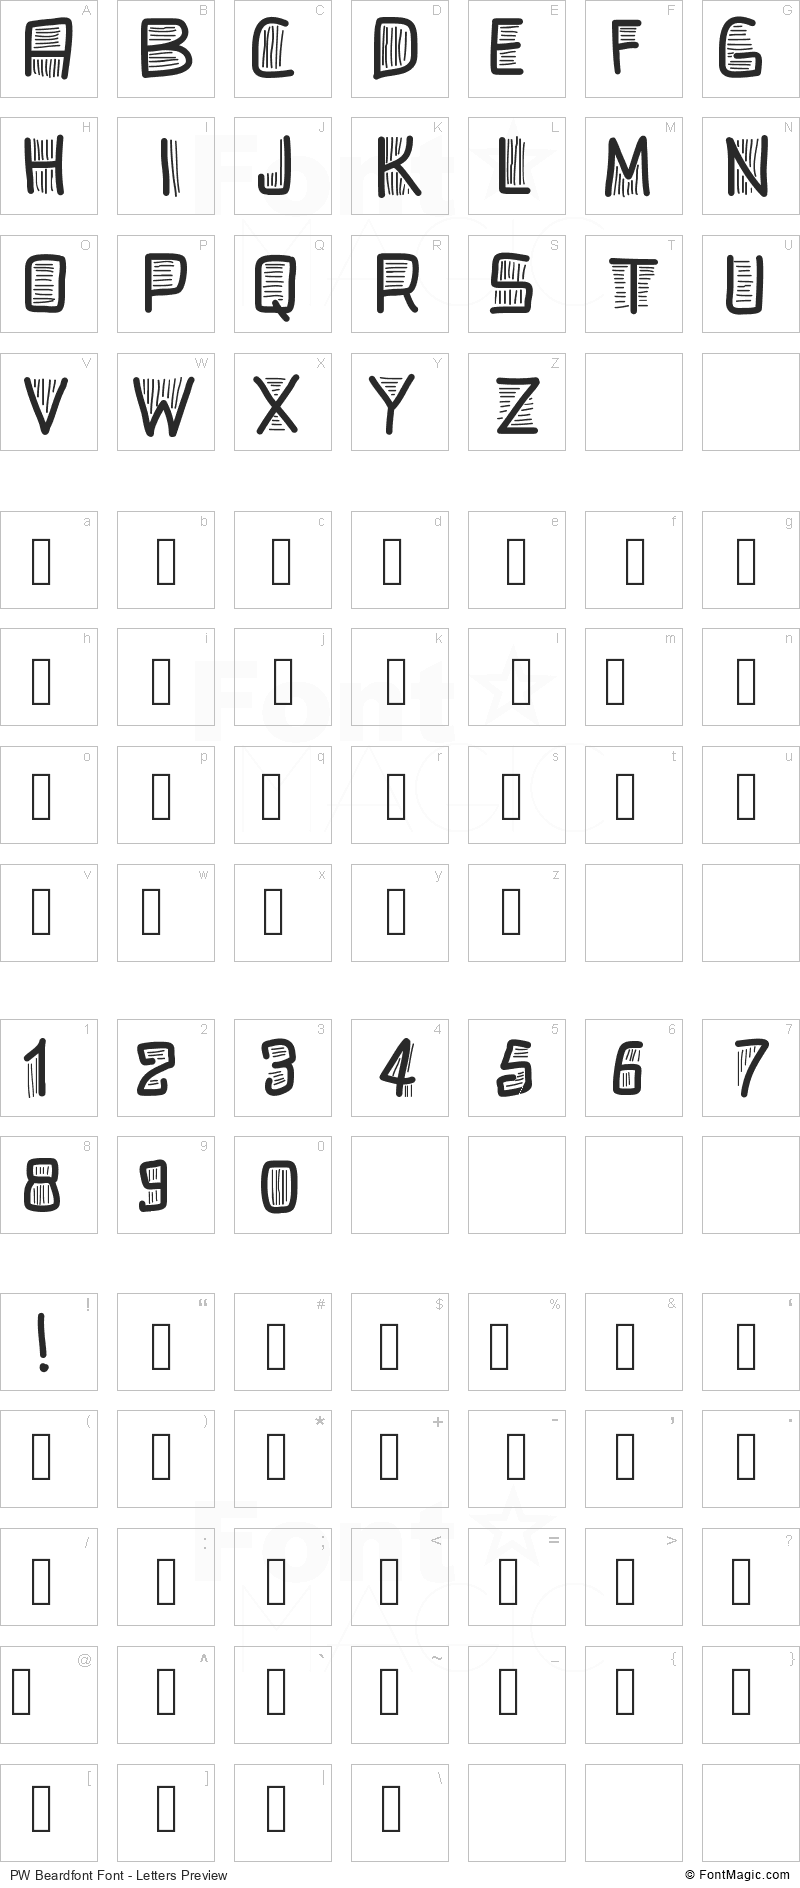 PW Beardfont Font - All Latters Preview Chart